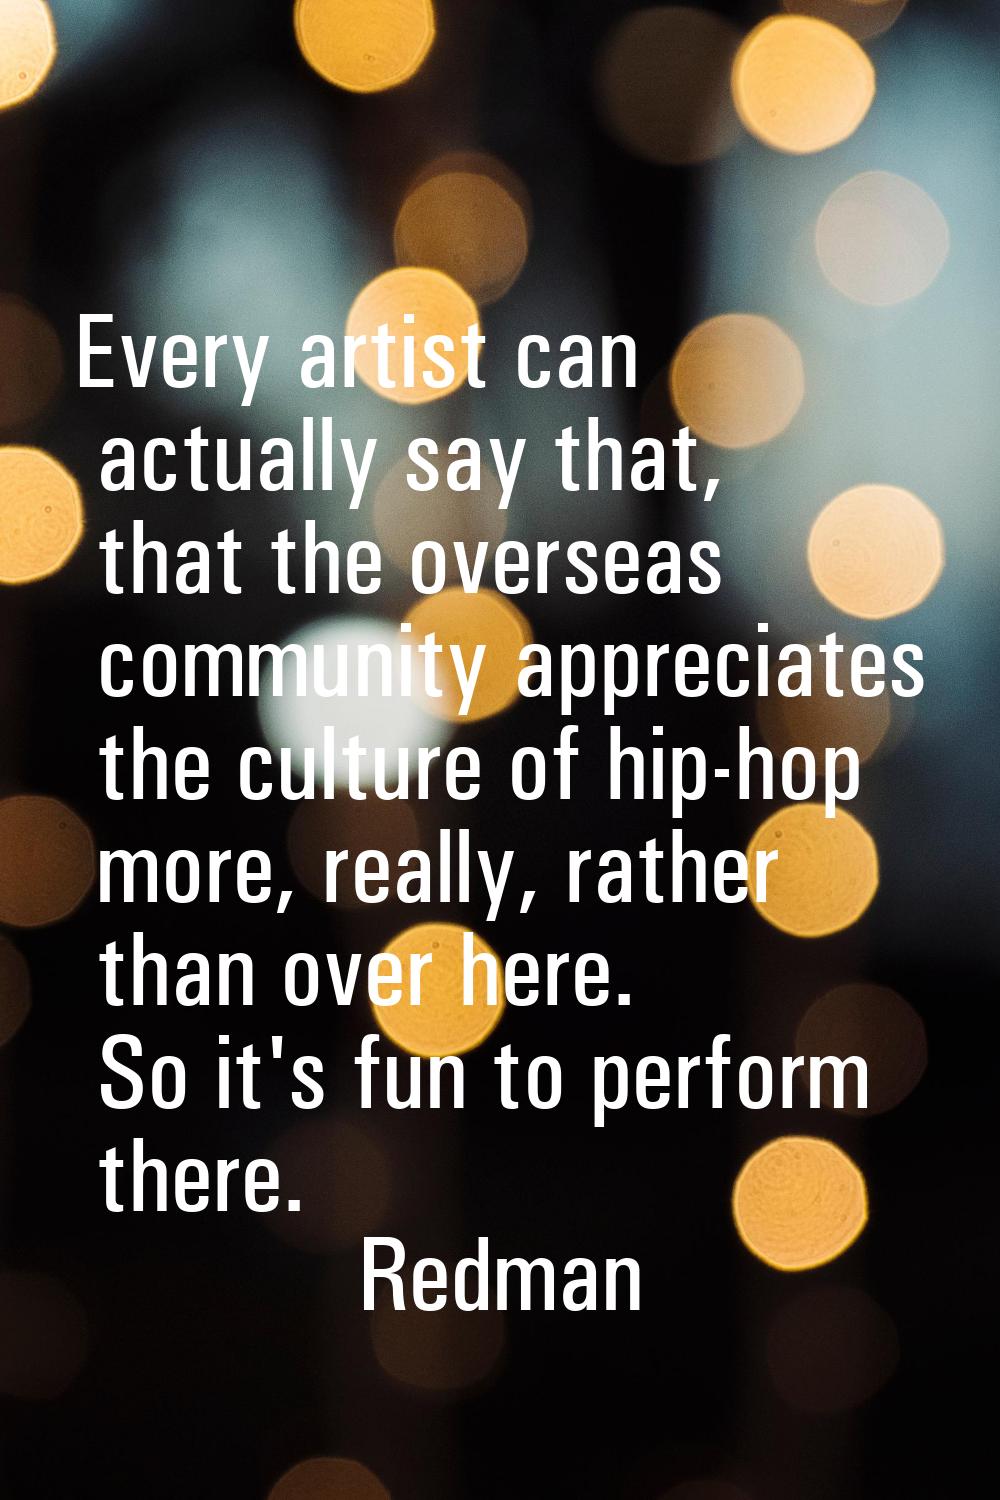 Every artist can actually say that, that the overseas community appreciates the culture of hip-hop 